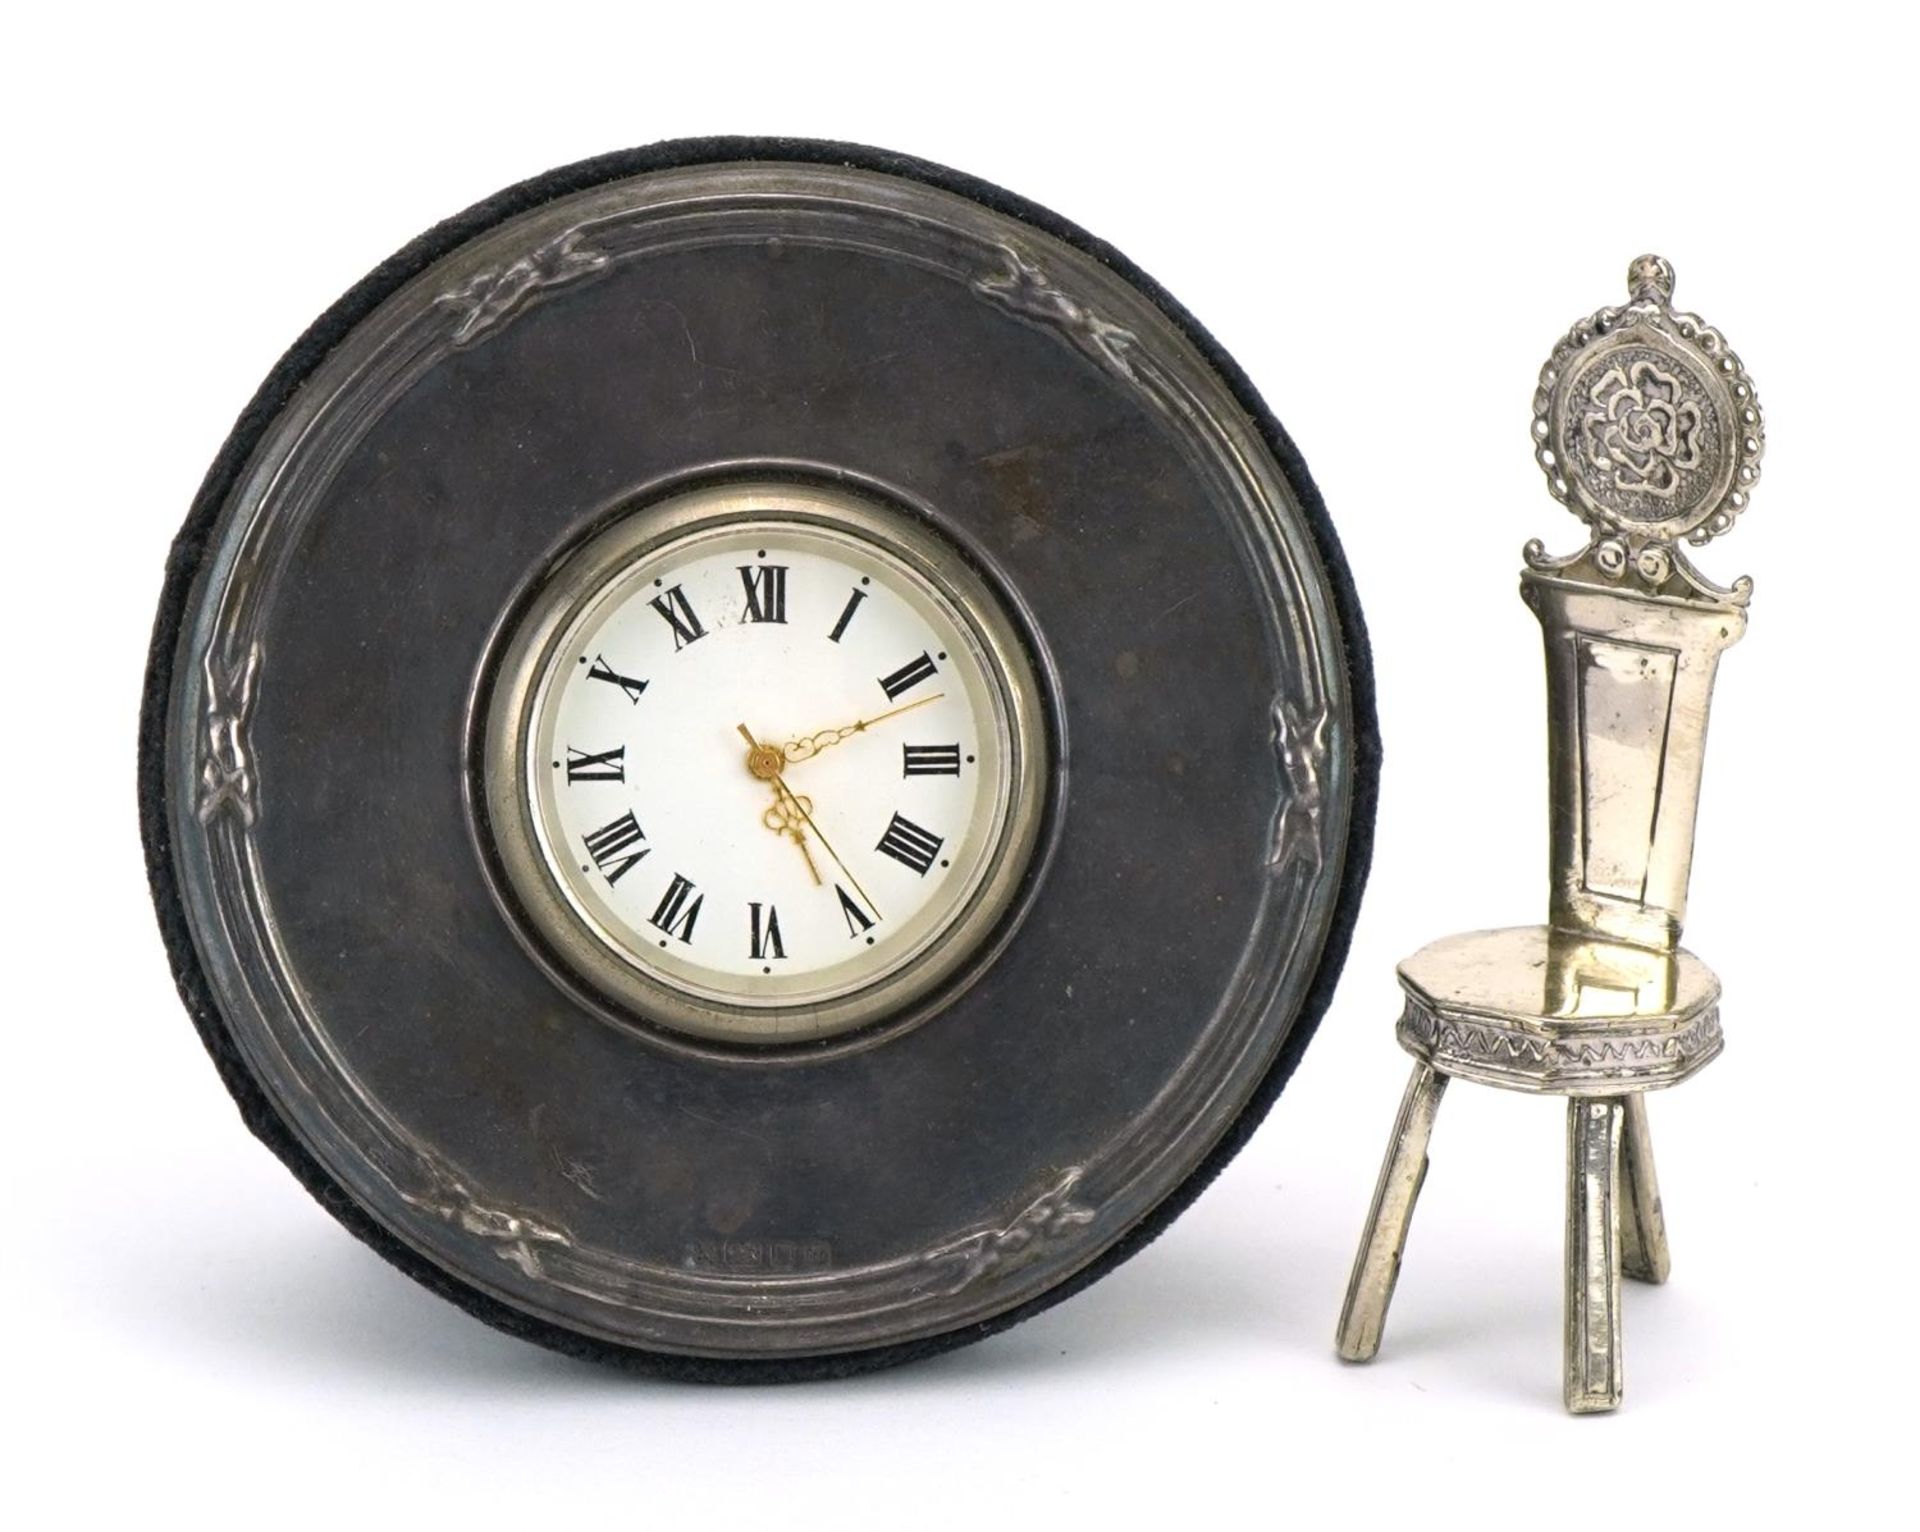 Circular silver mounted easel clock and a silver doll's house chair decorated with a Tudor rose, the